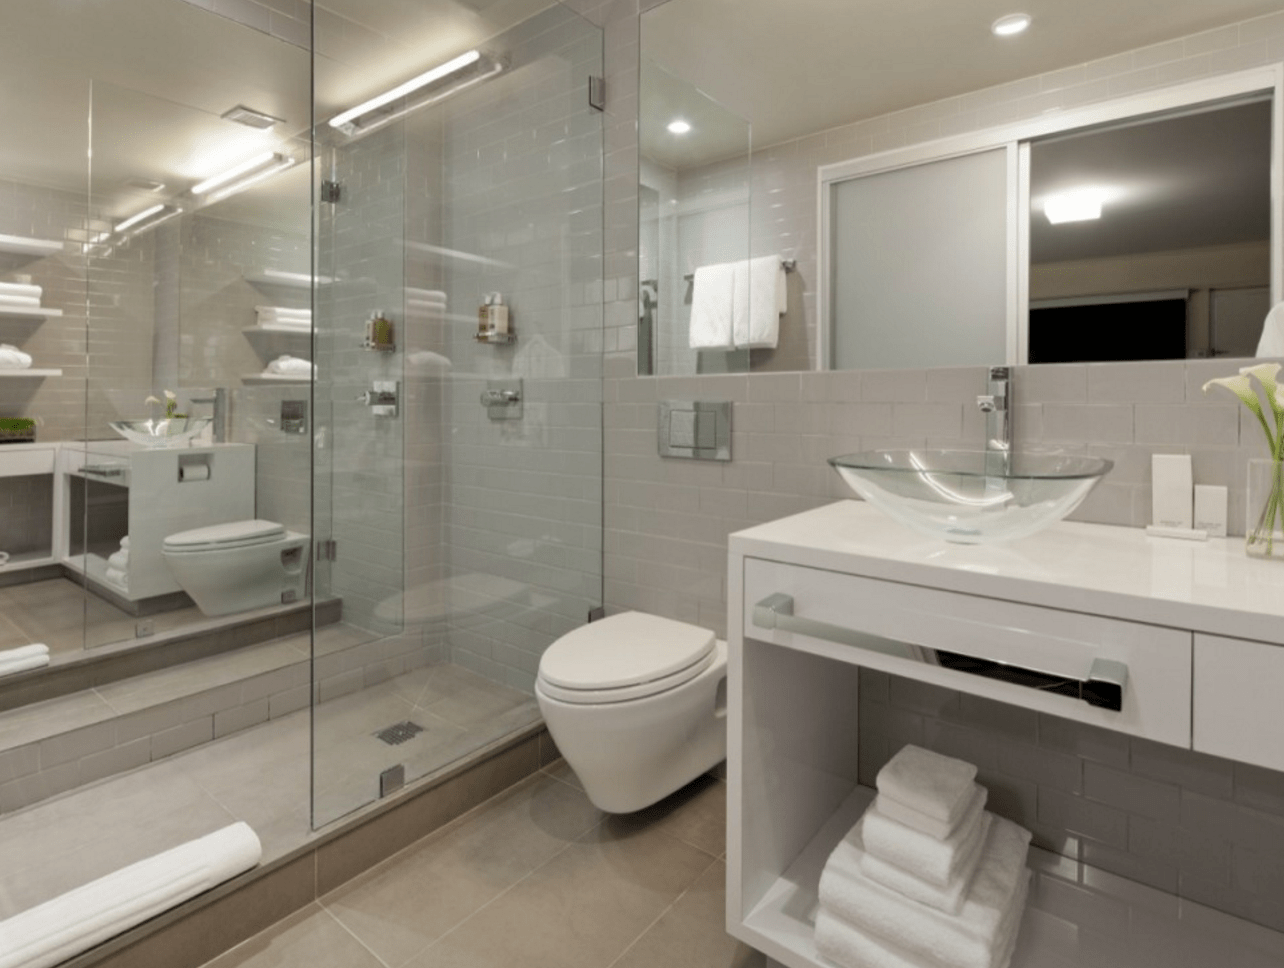 Hotels-The-Out-NYC-Restroom-Room